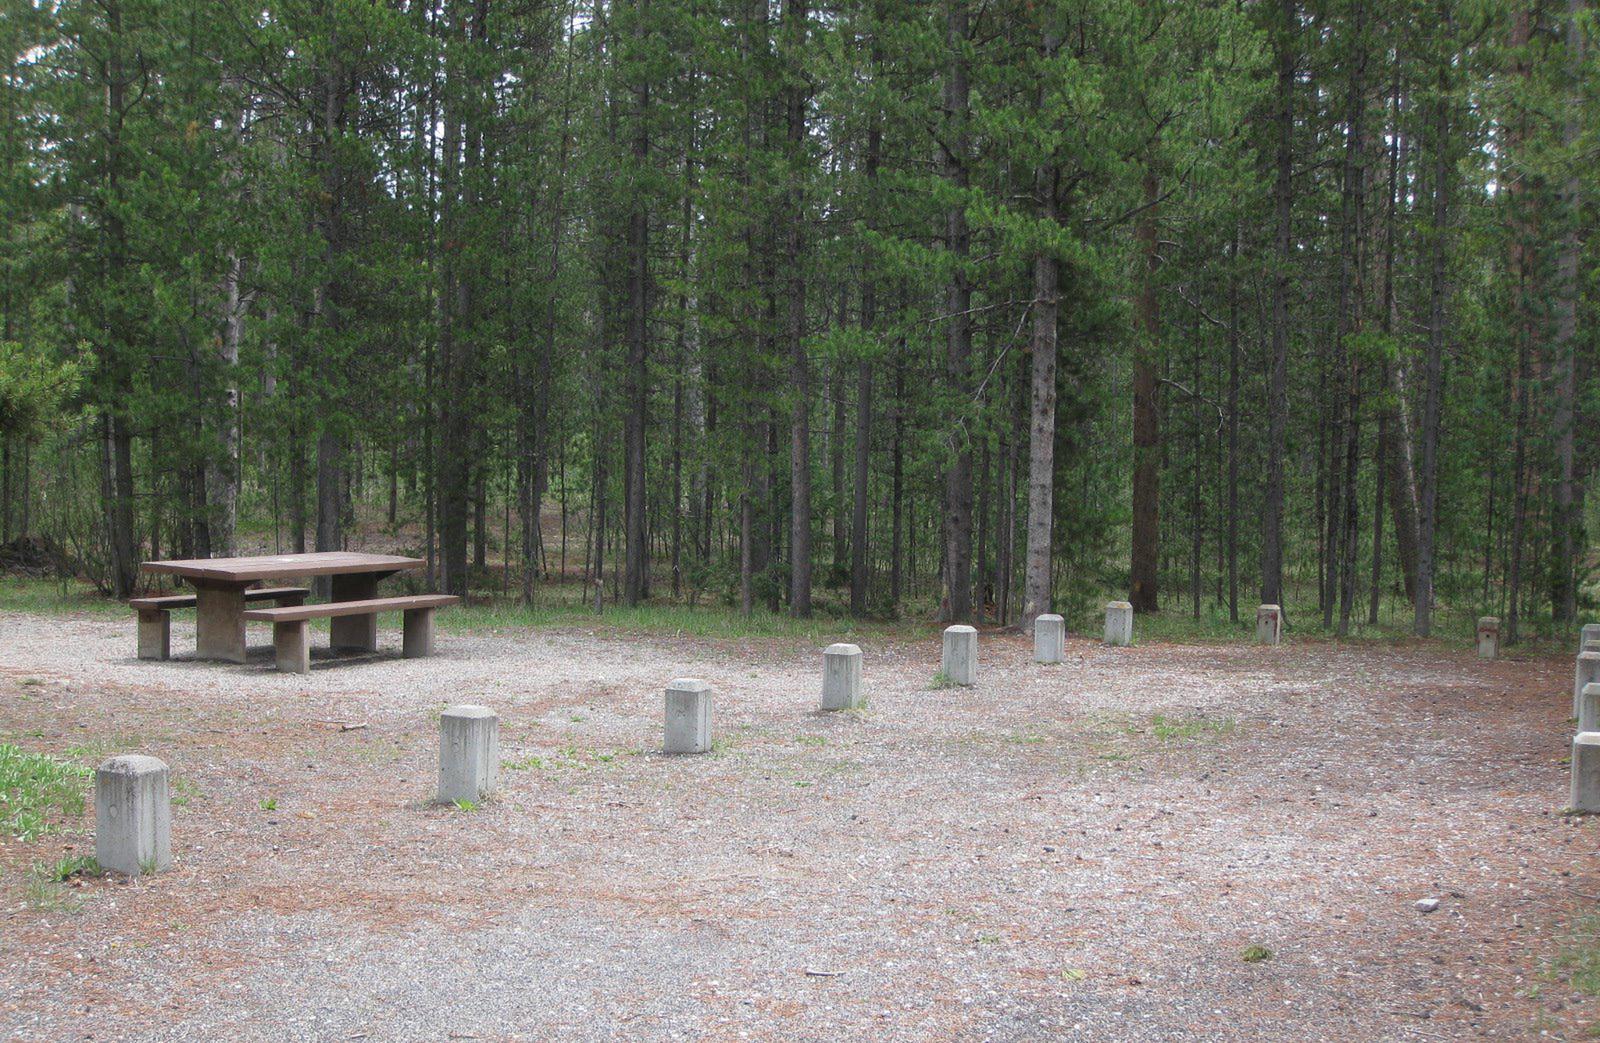 Site A16, surrounded by pine trees, picnic table & fire ringSite A16